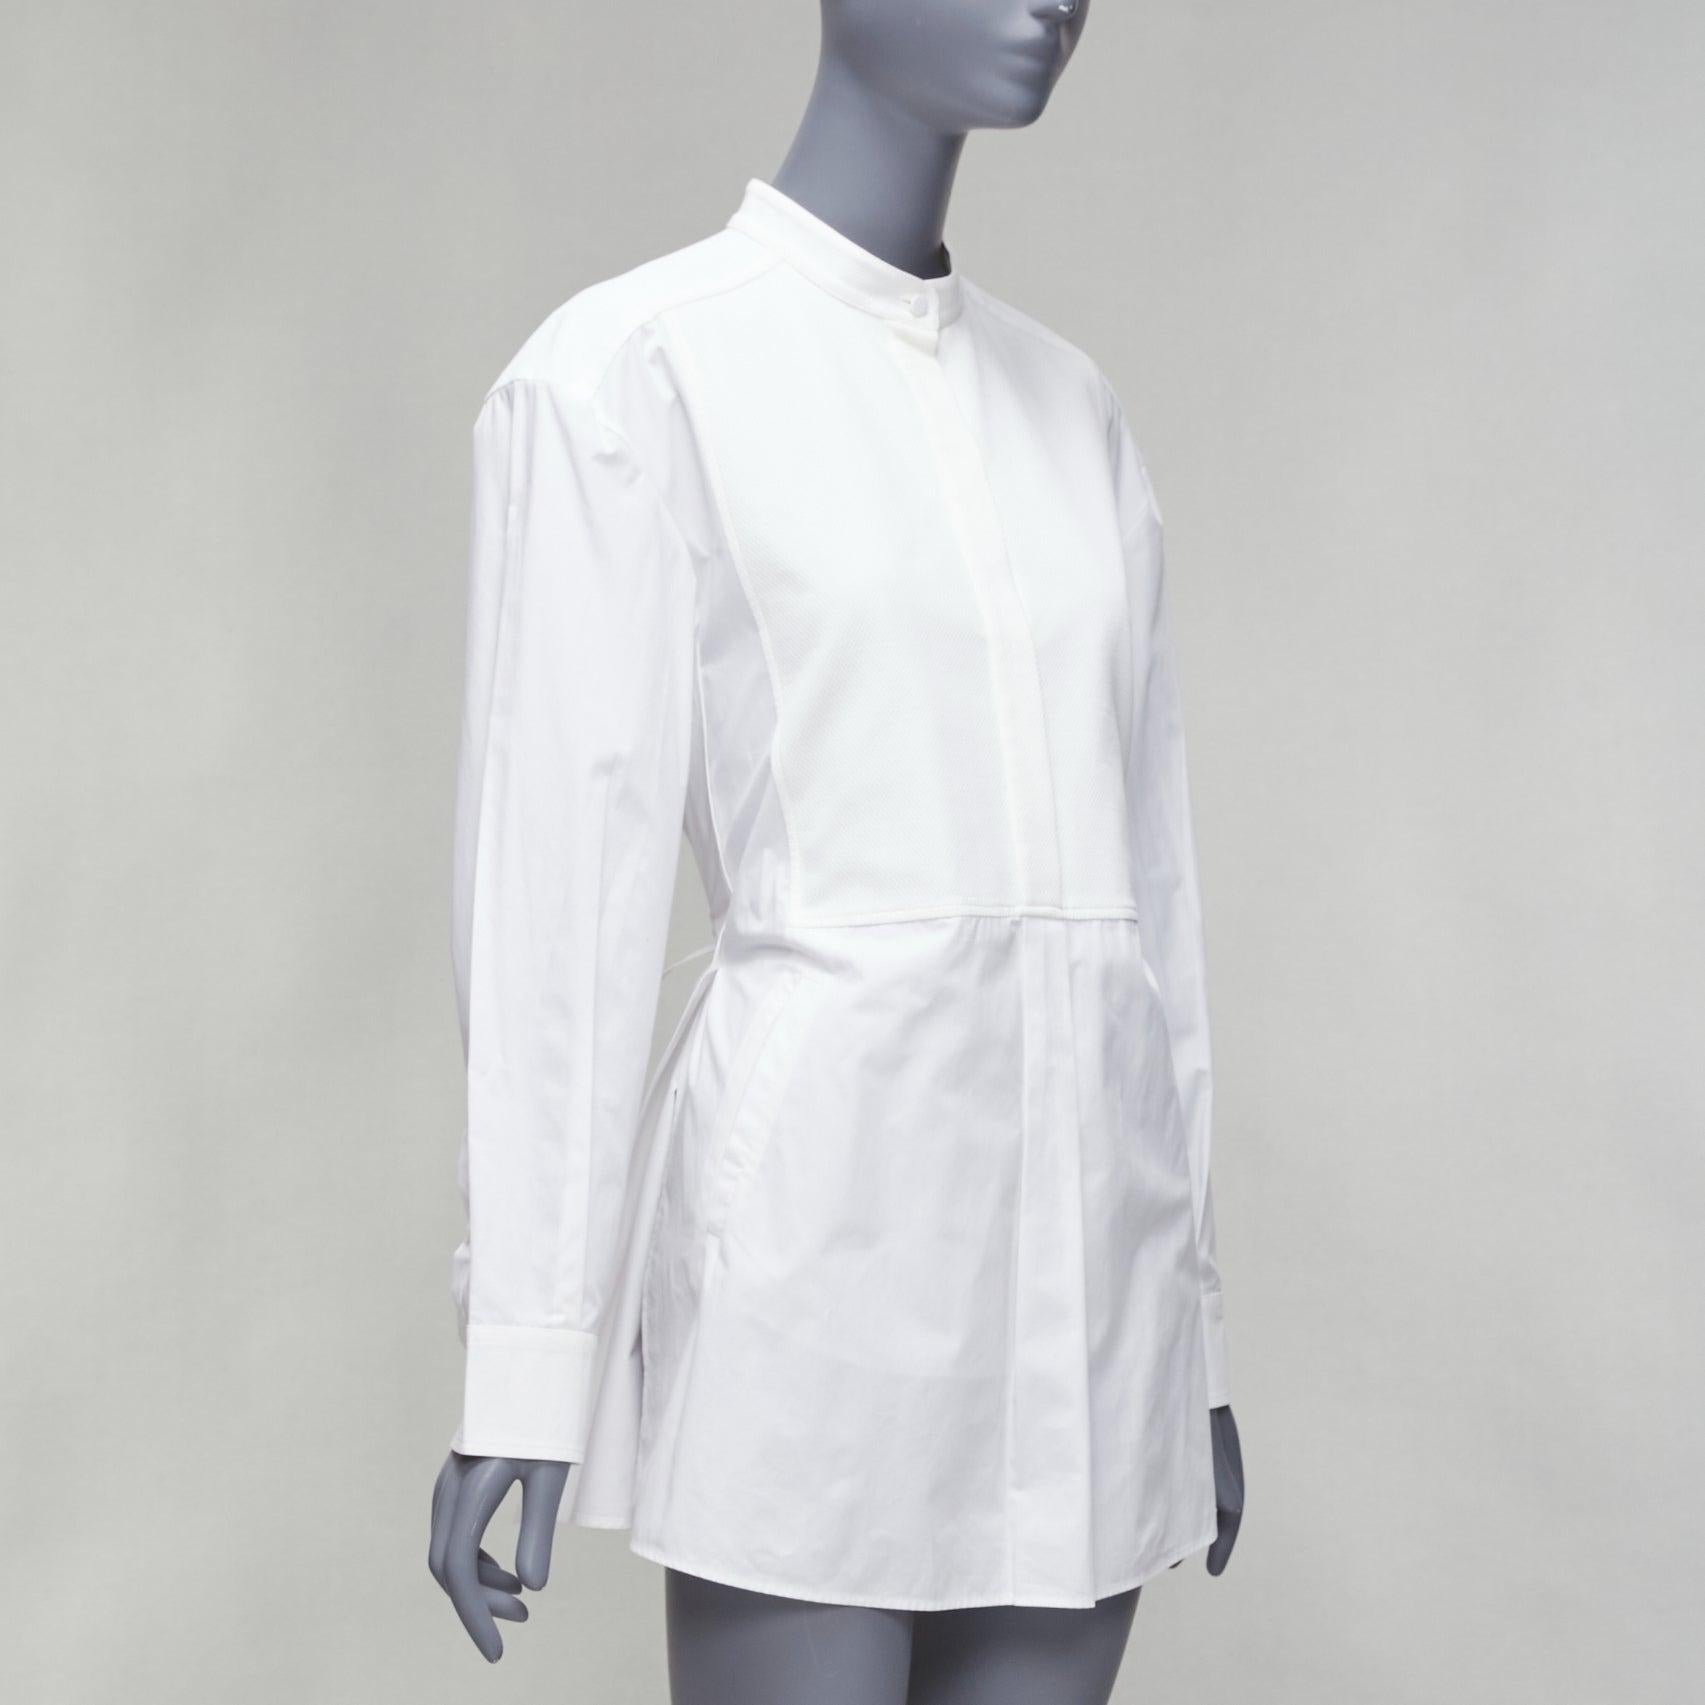 VALENTINO white cream cotton waffle front tie pleated back tux shirt IT36 XXS
Reference: LNKO/A02341
Brand: Valentino
Designer: Pier Paolo Piccioli
Material: Cotton
Color: White, Cream
Pattern: Solid
Closure: Self Tie
Extra Details: Tie bow at back.